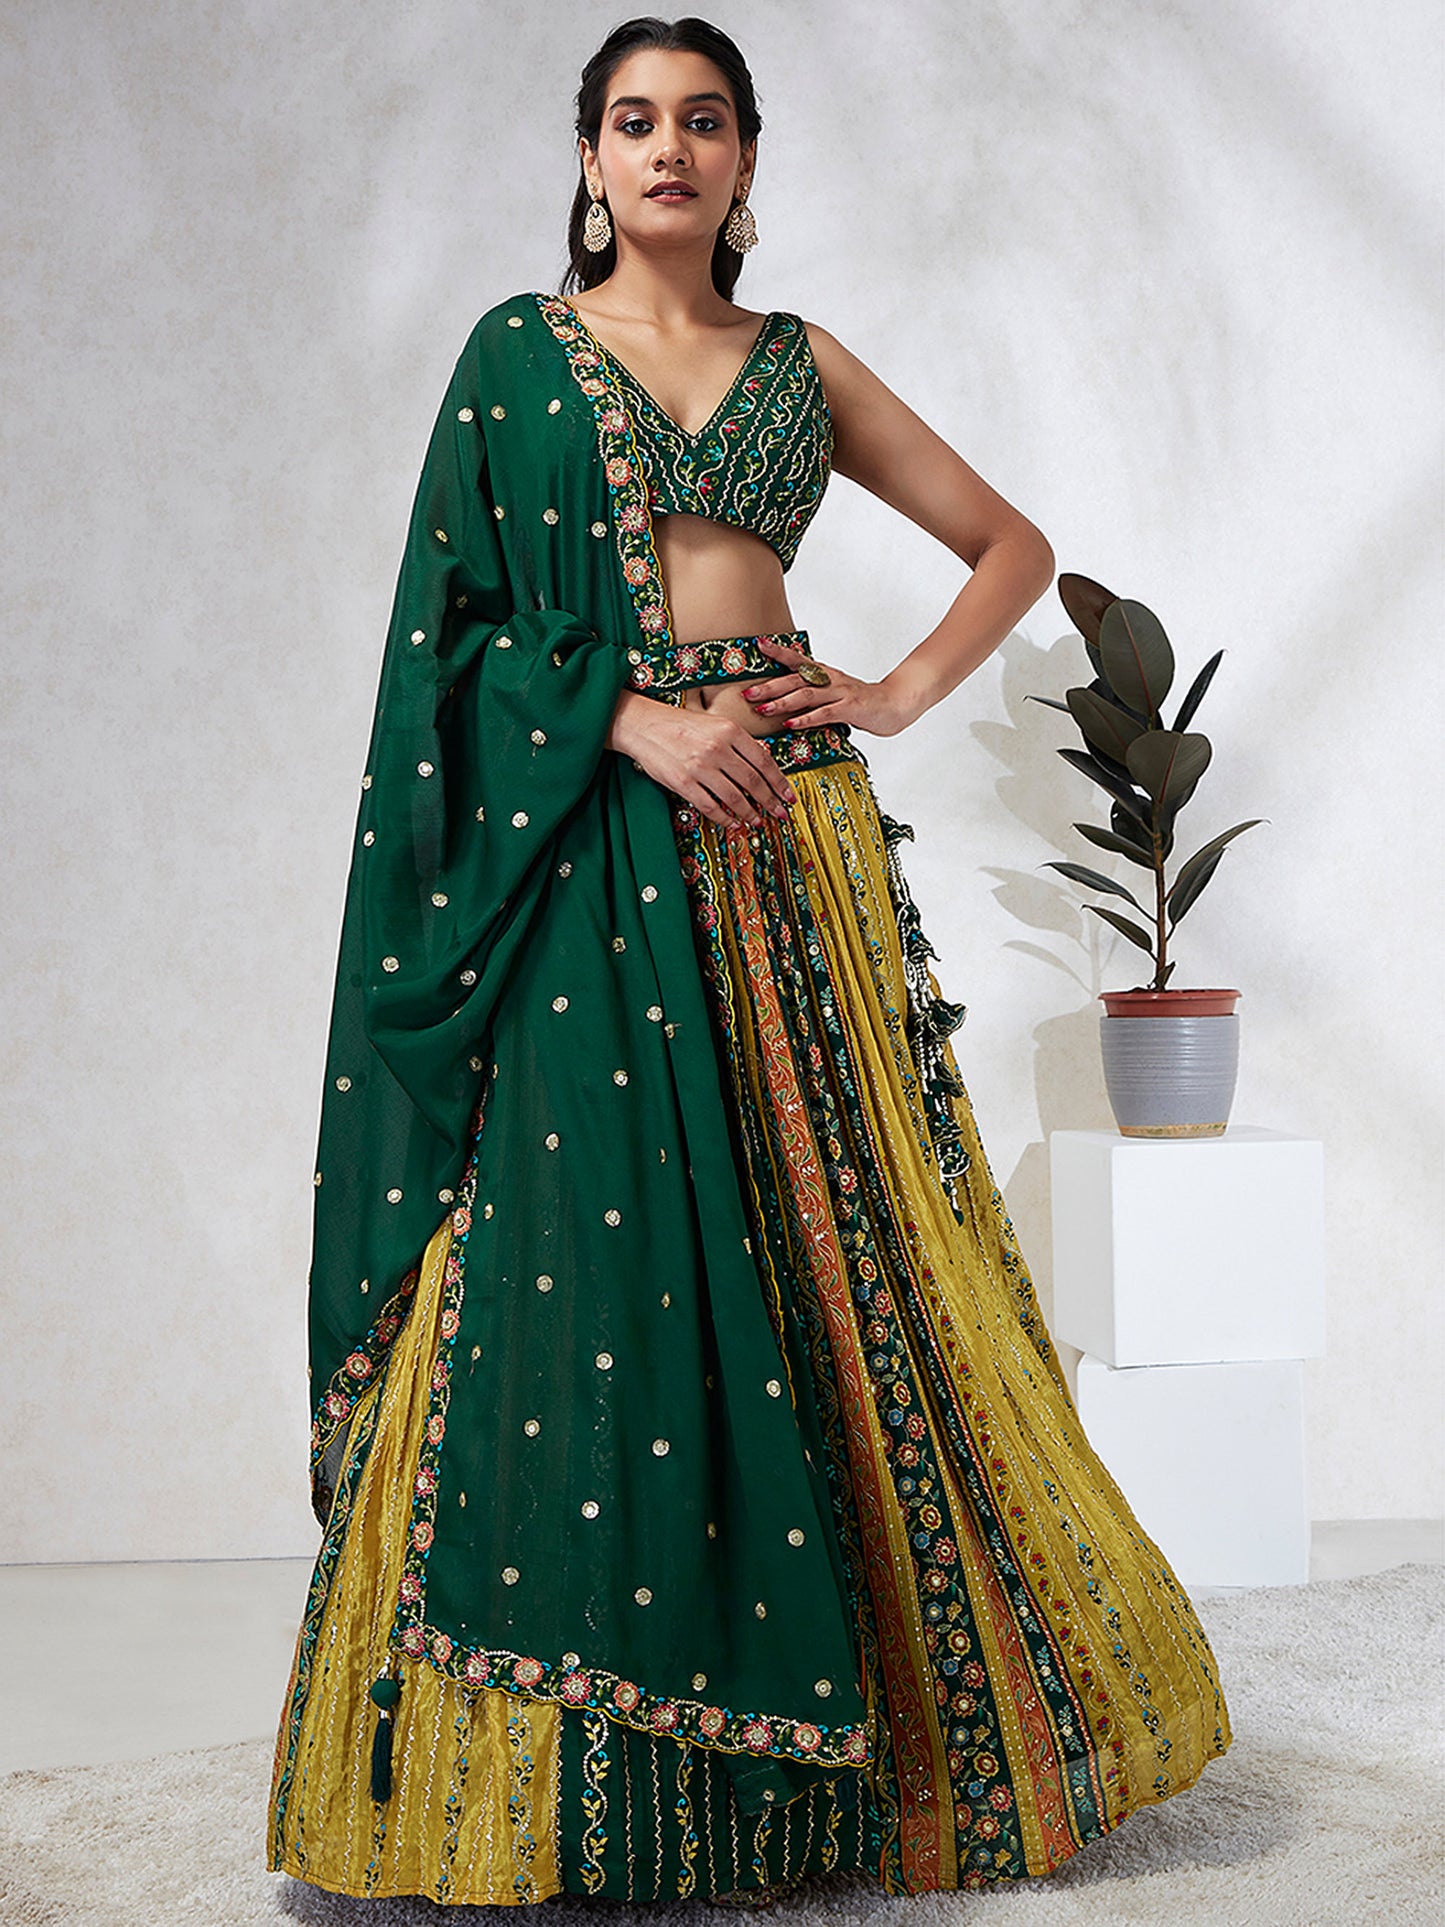 Green Chiffon Position print with Sequins embroidery Lehenga